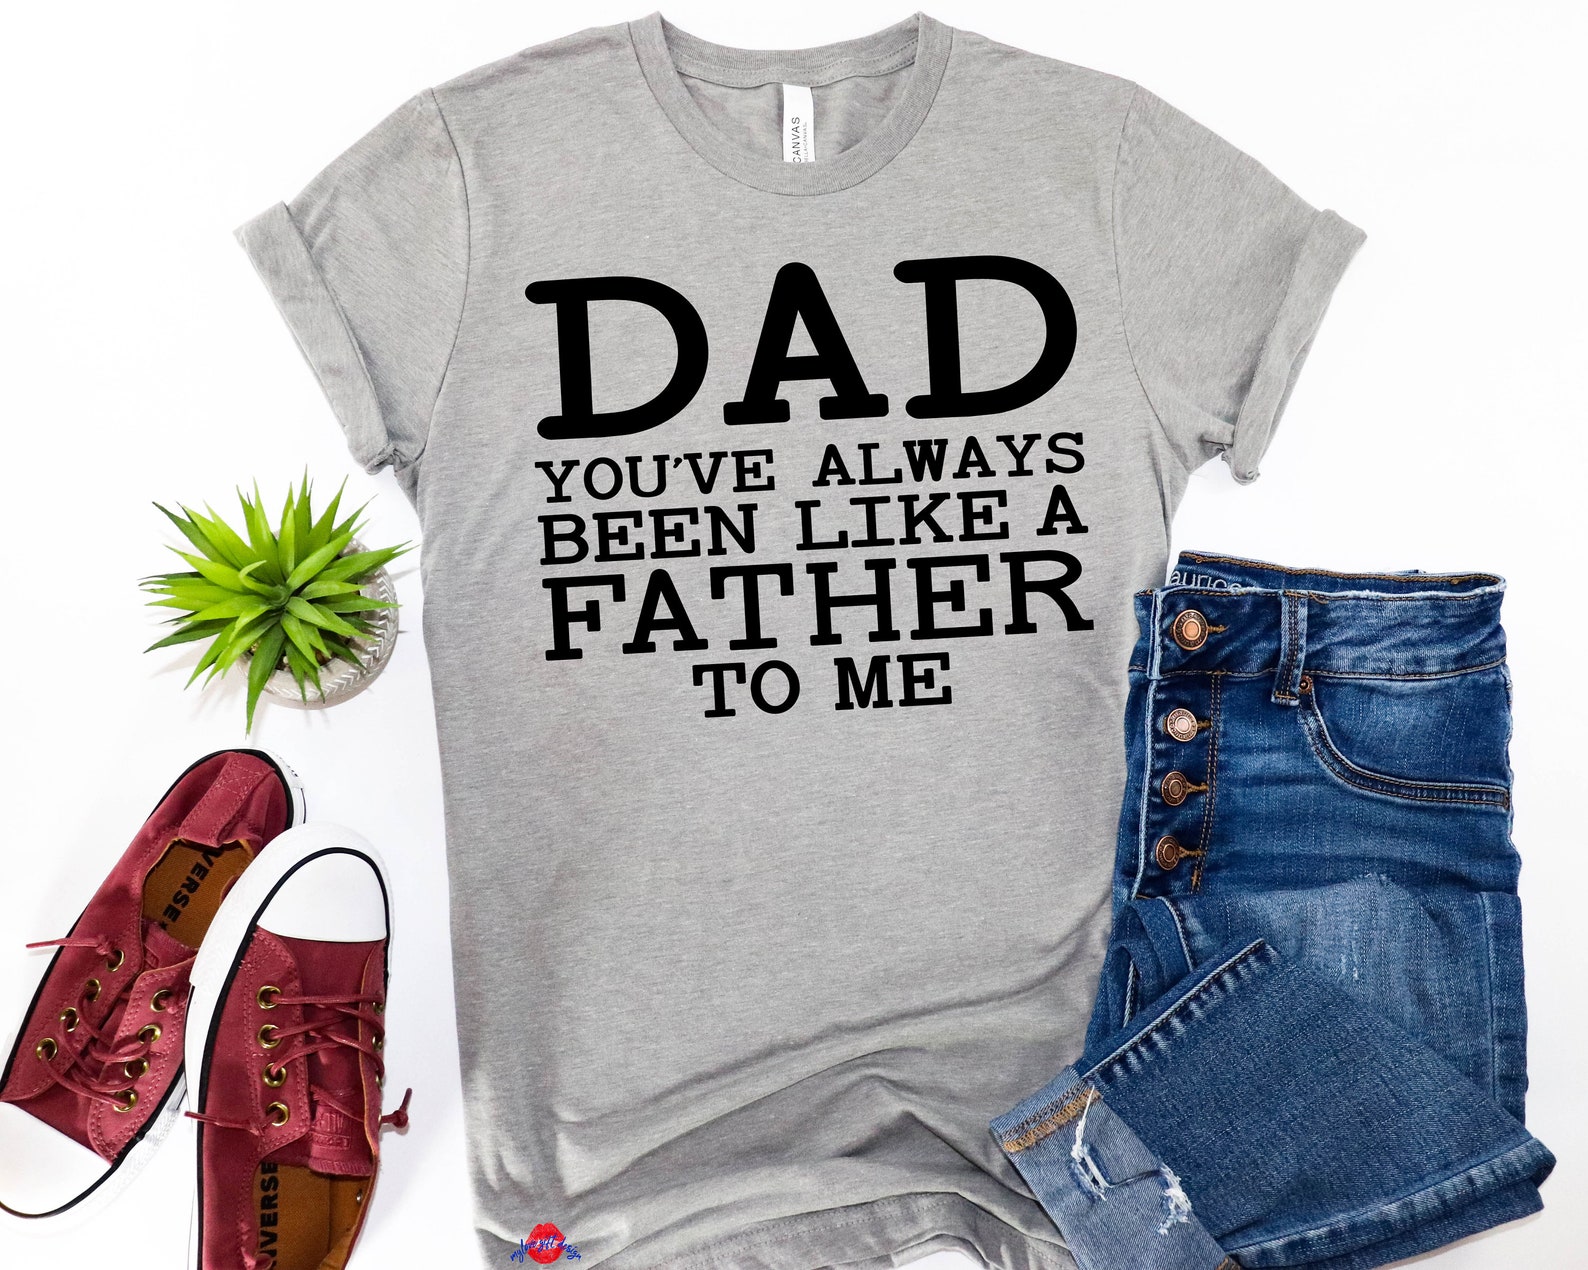 Dad You've Always Been Like A Father To Me svg png dxf | Etsy